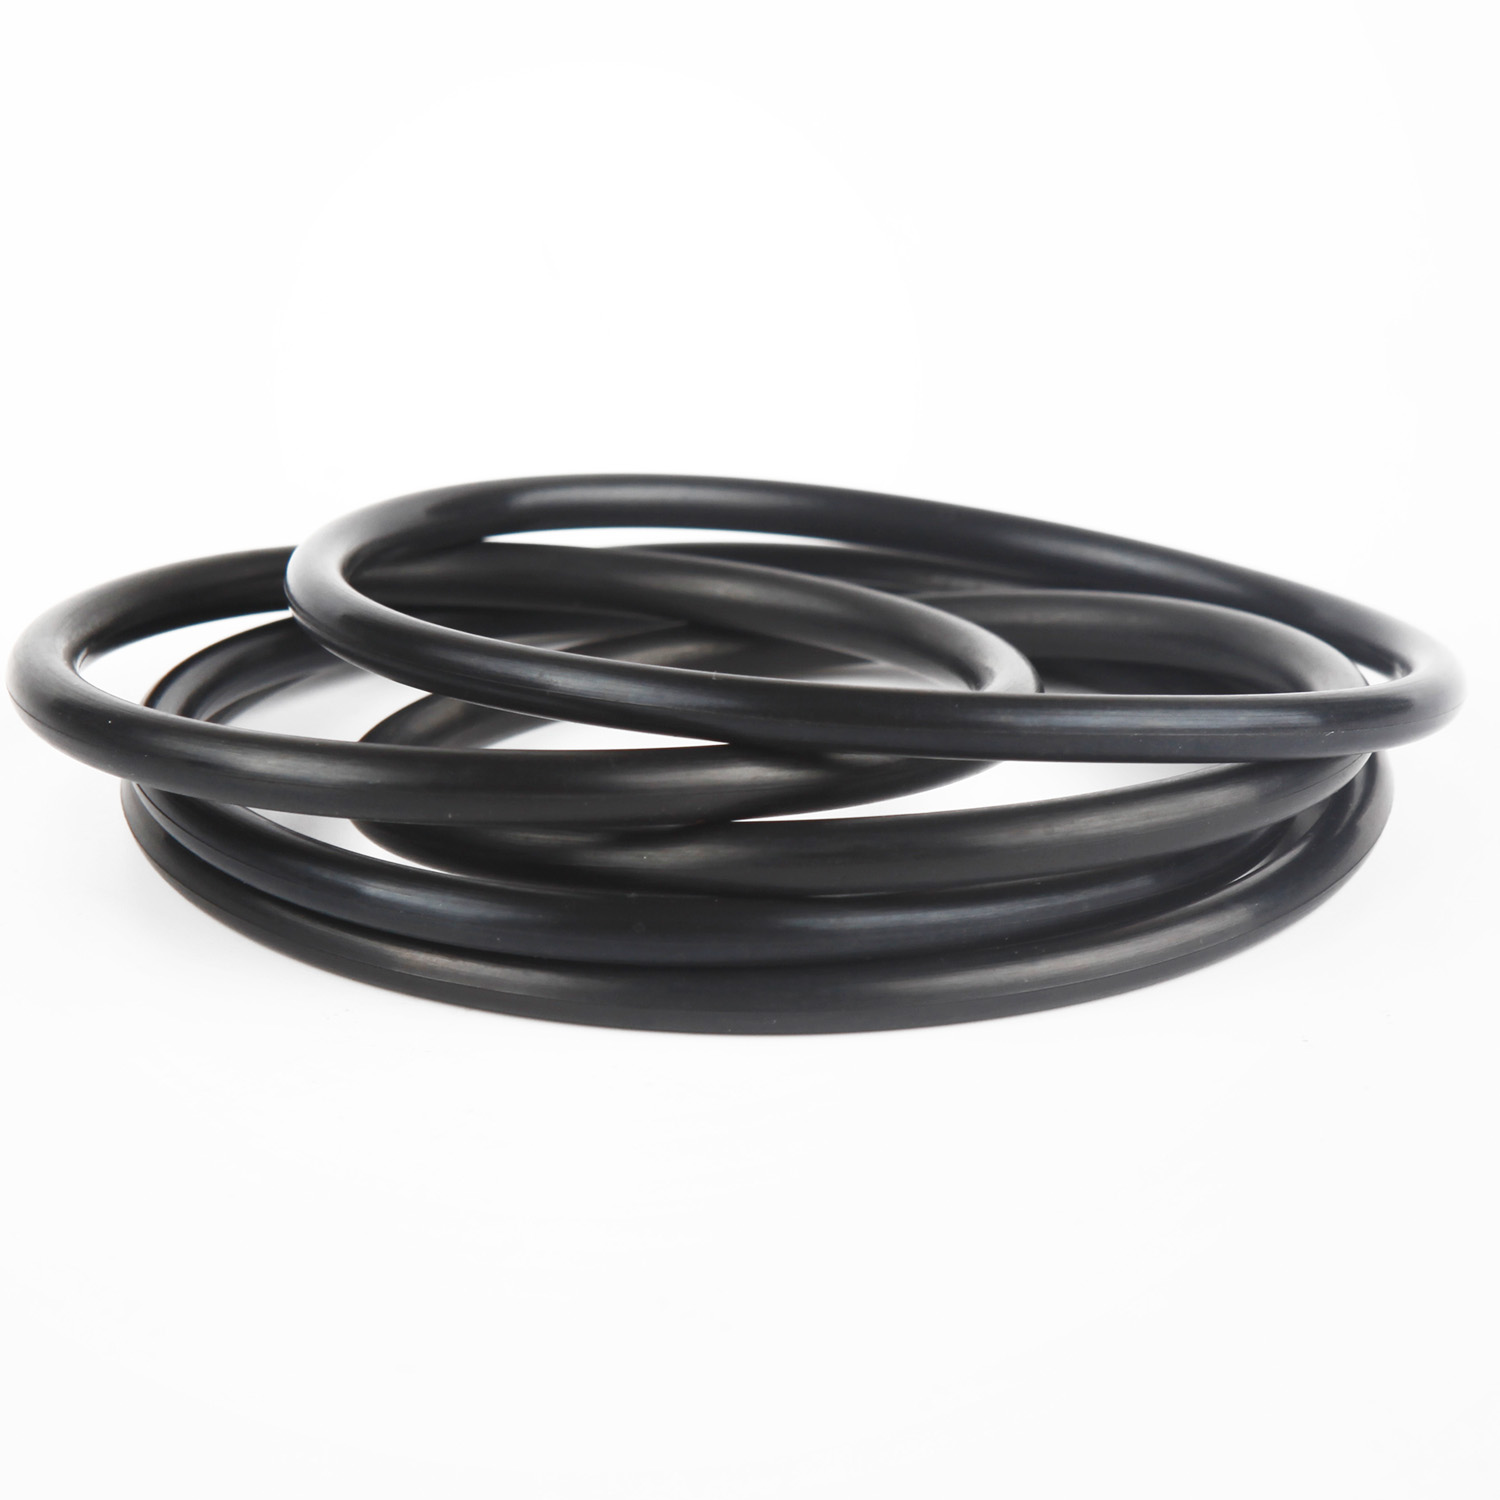 Well Sale Machinery Performance Automotive Rubber White FKM Fluorine O Ring Seals